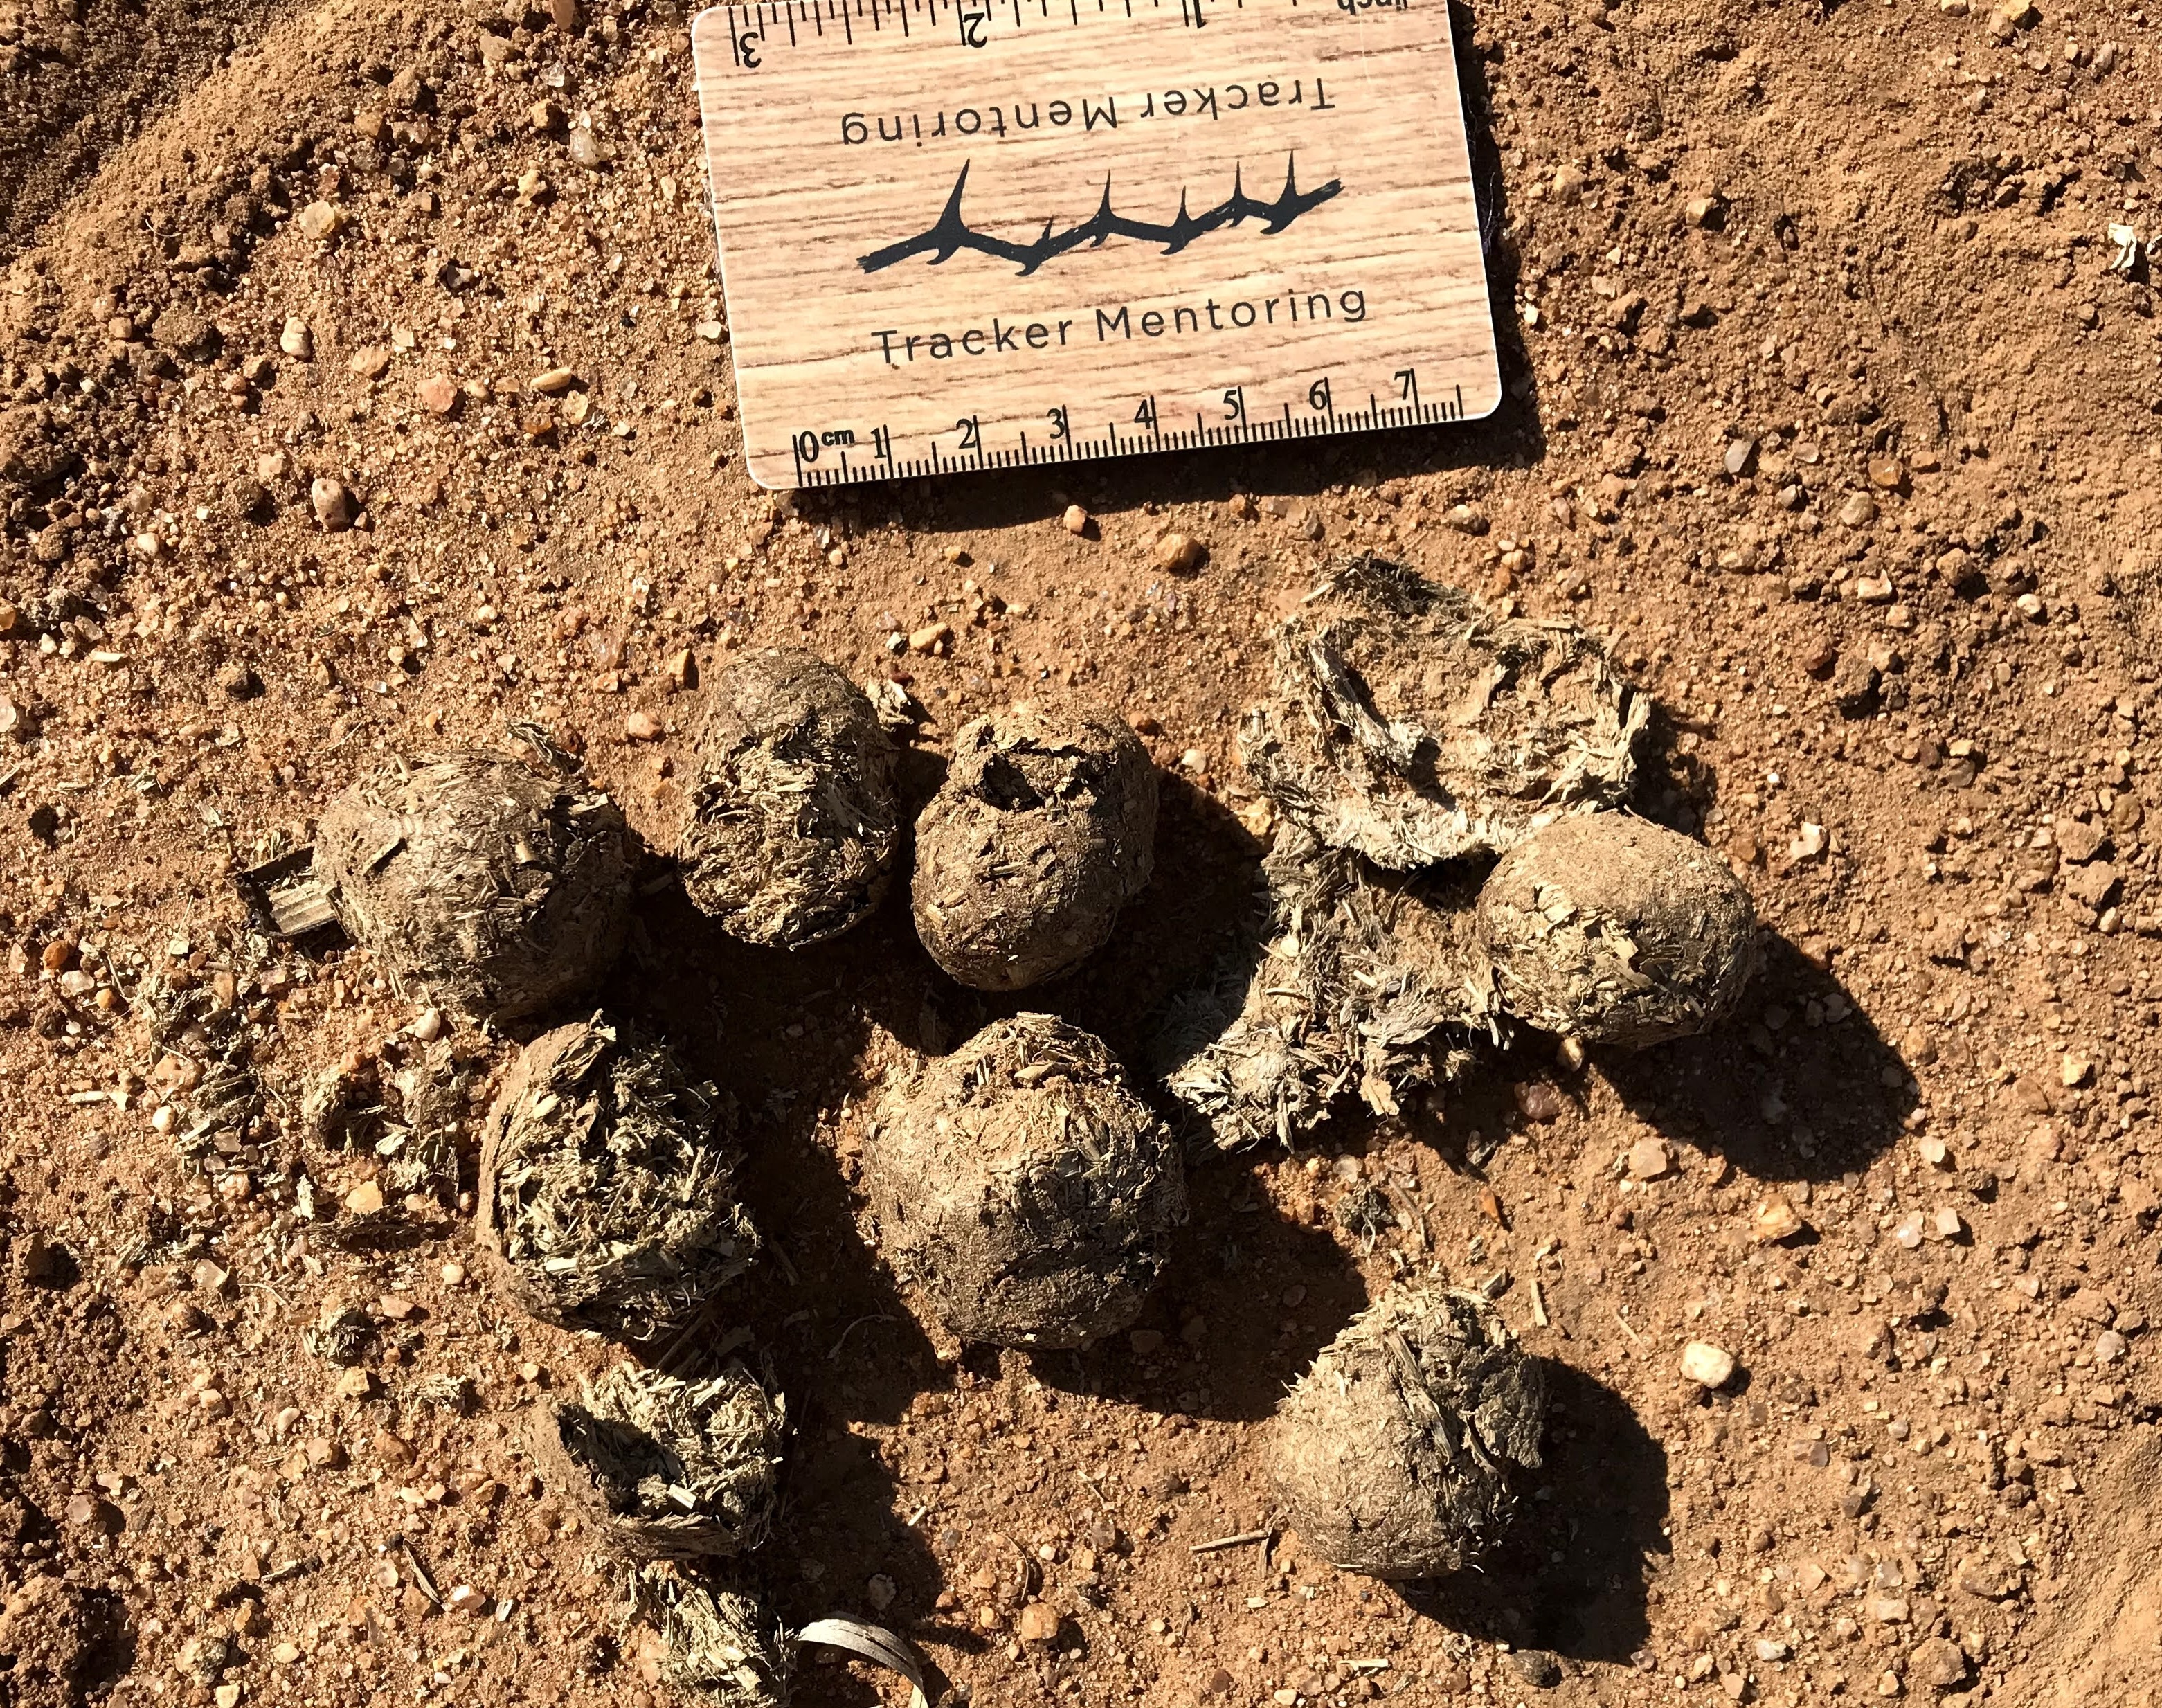 Mammal, Warthog dung, Scat, Greater Kruger area of South Africa, Sandy Reed